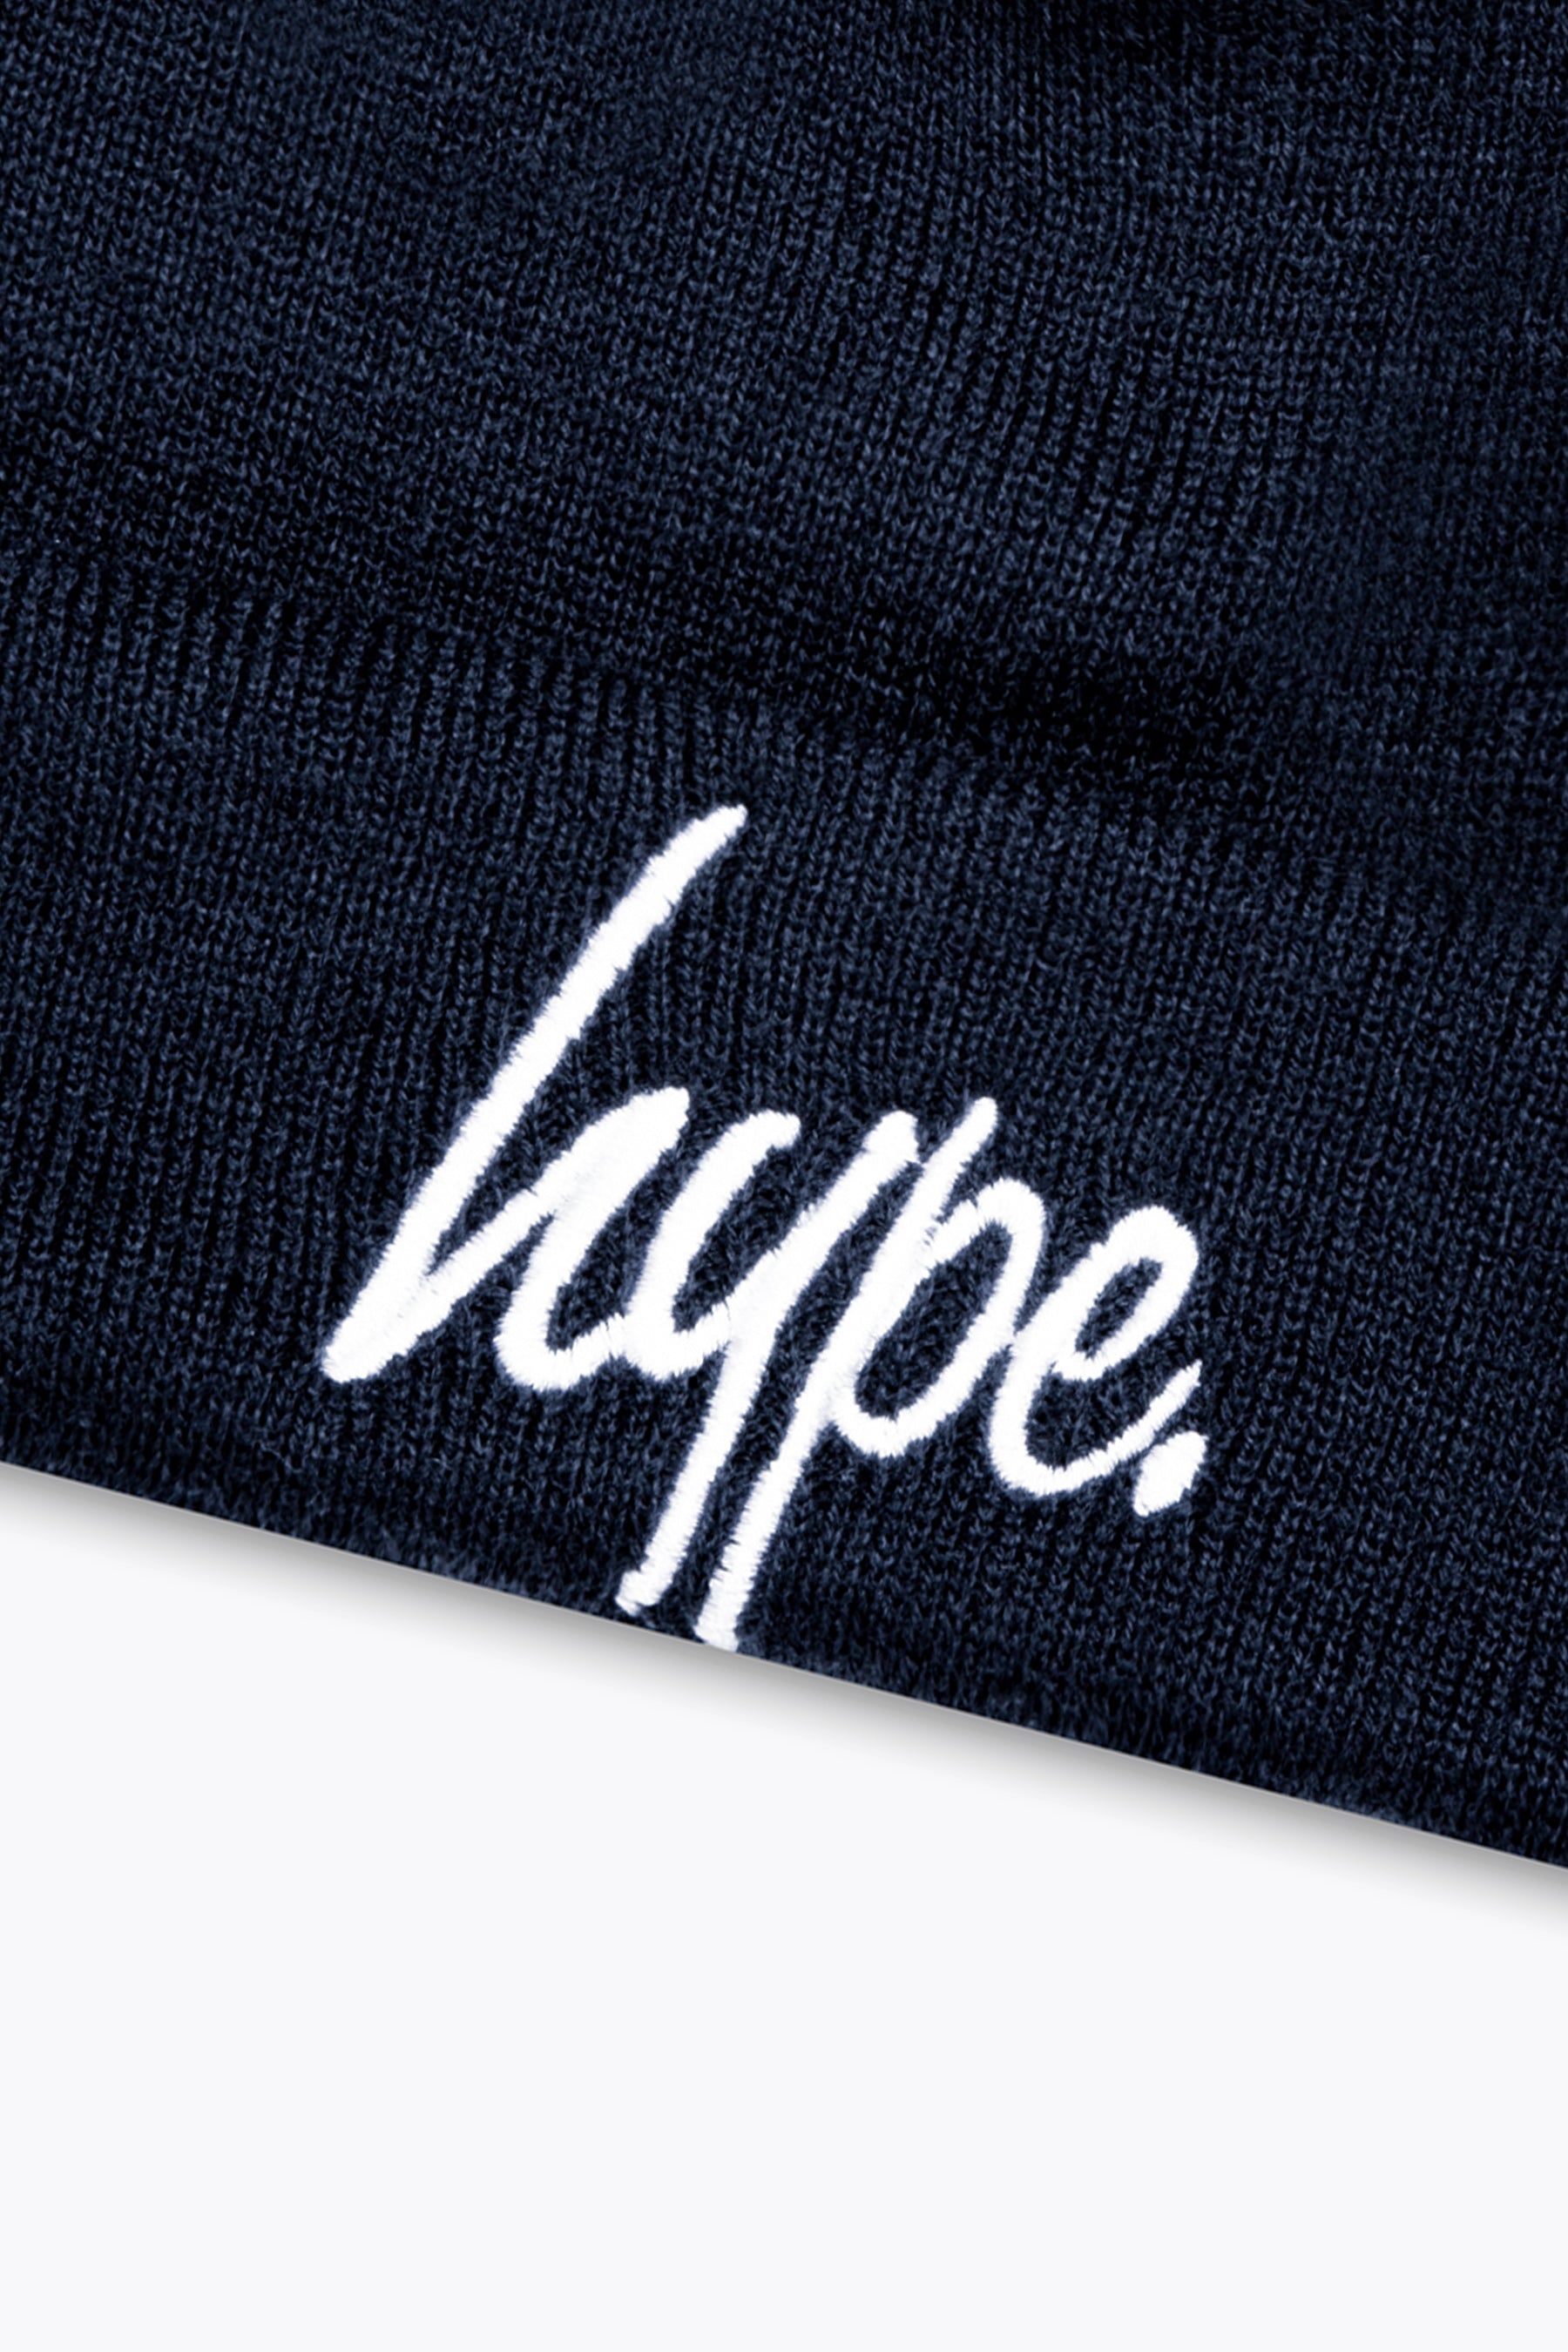 Stay cosy in the HYPE. Navy Script Kids Beanie. Designed in an all-over navy colour palette. With a soft-touch woven acrylic fabric for supreme comfort. In our classic junior's beanie shape with a turned-up cuff design, finished with the iconic HYPE. script logo embroidered on the front in a contrasting white. Machine washable.